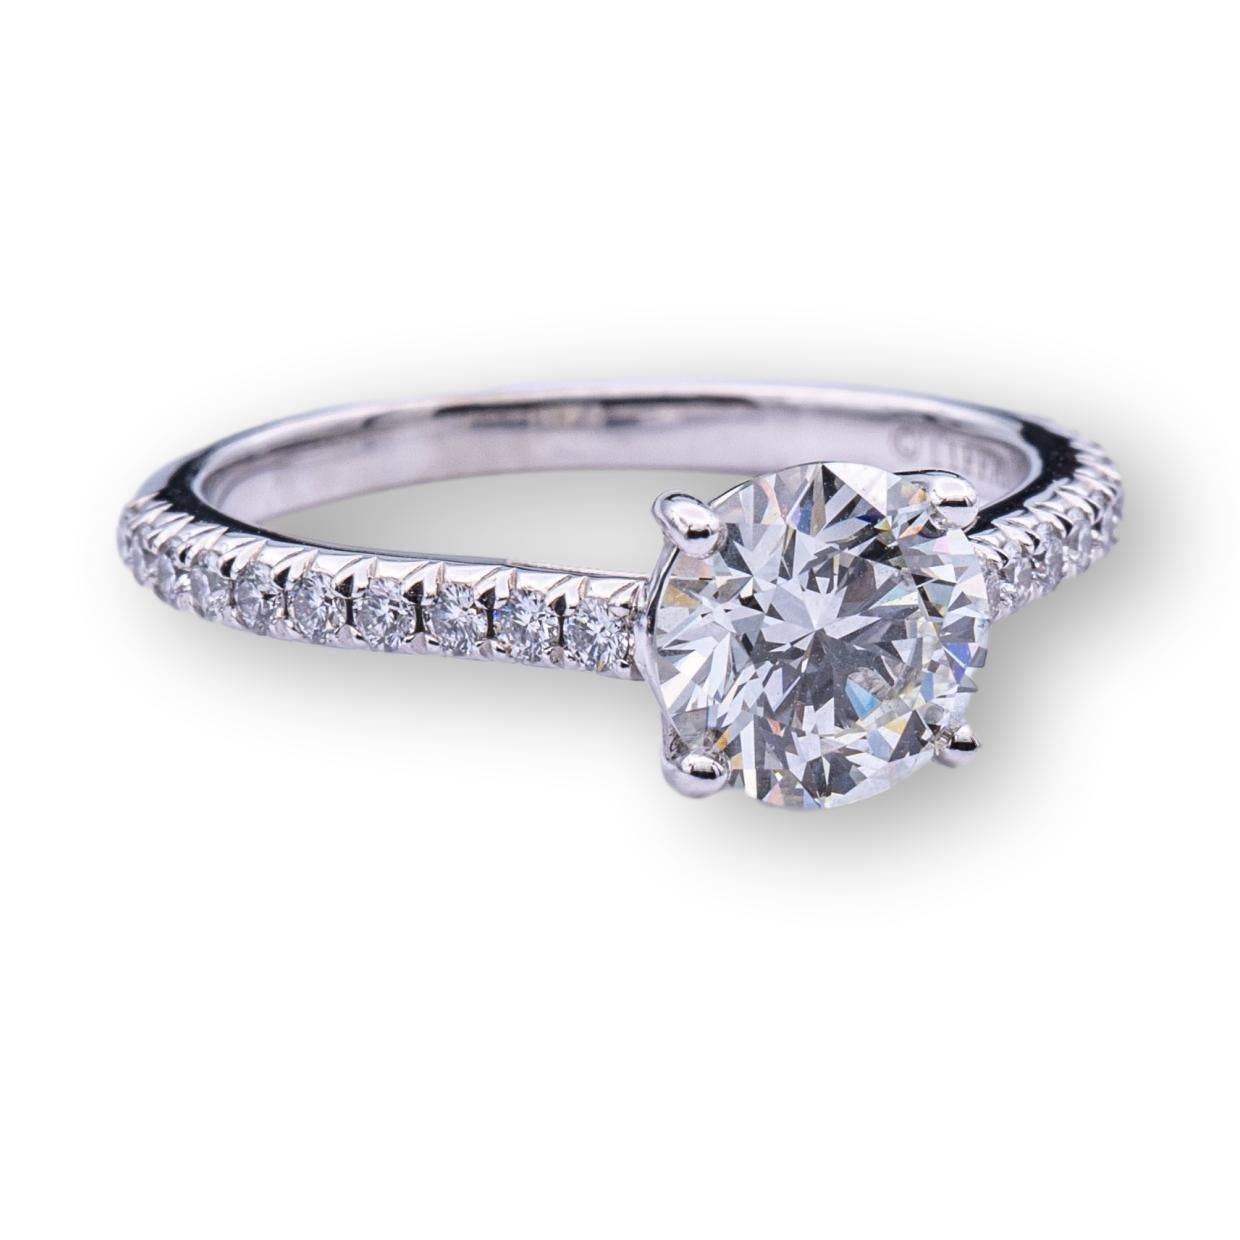 Tiffany & Co. engagement ring from the Novo collection finely crafted in platinum featuring a round brilliant diamond center weighing 0.95 carats , I color , VVS2 clarity set in a 4 prong basket setting adorned with 20 bead set round brilliant cut